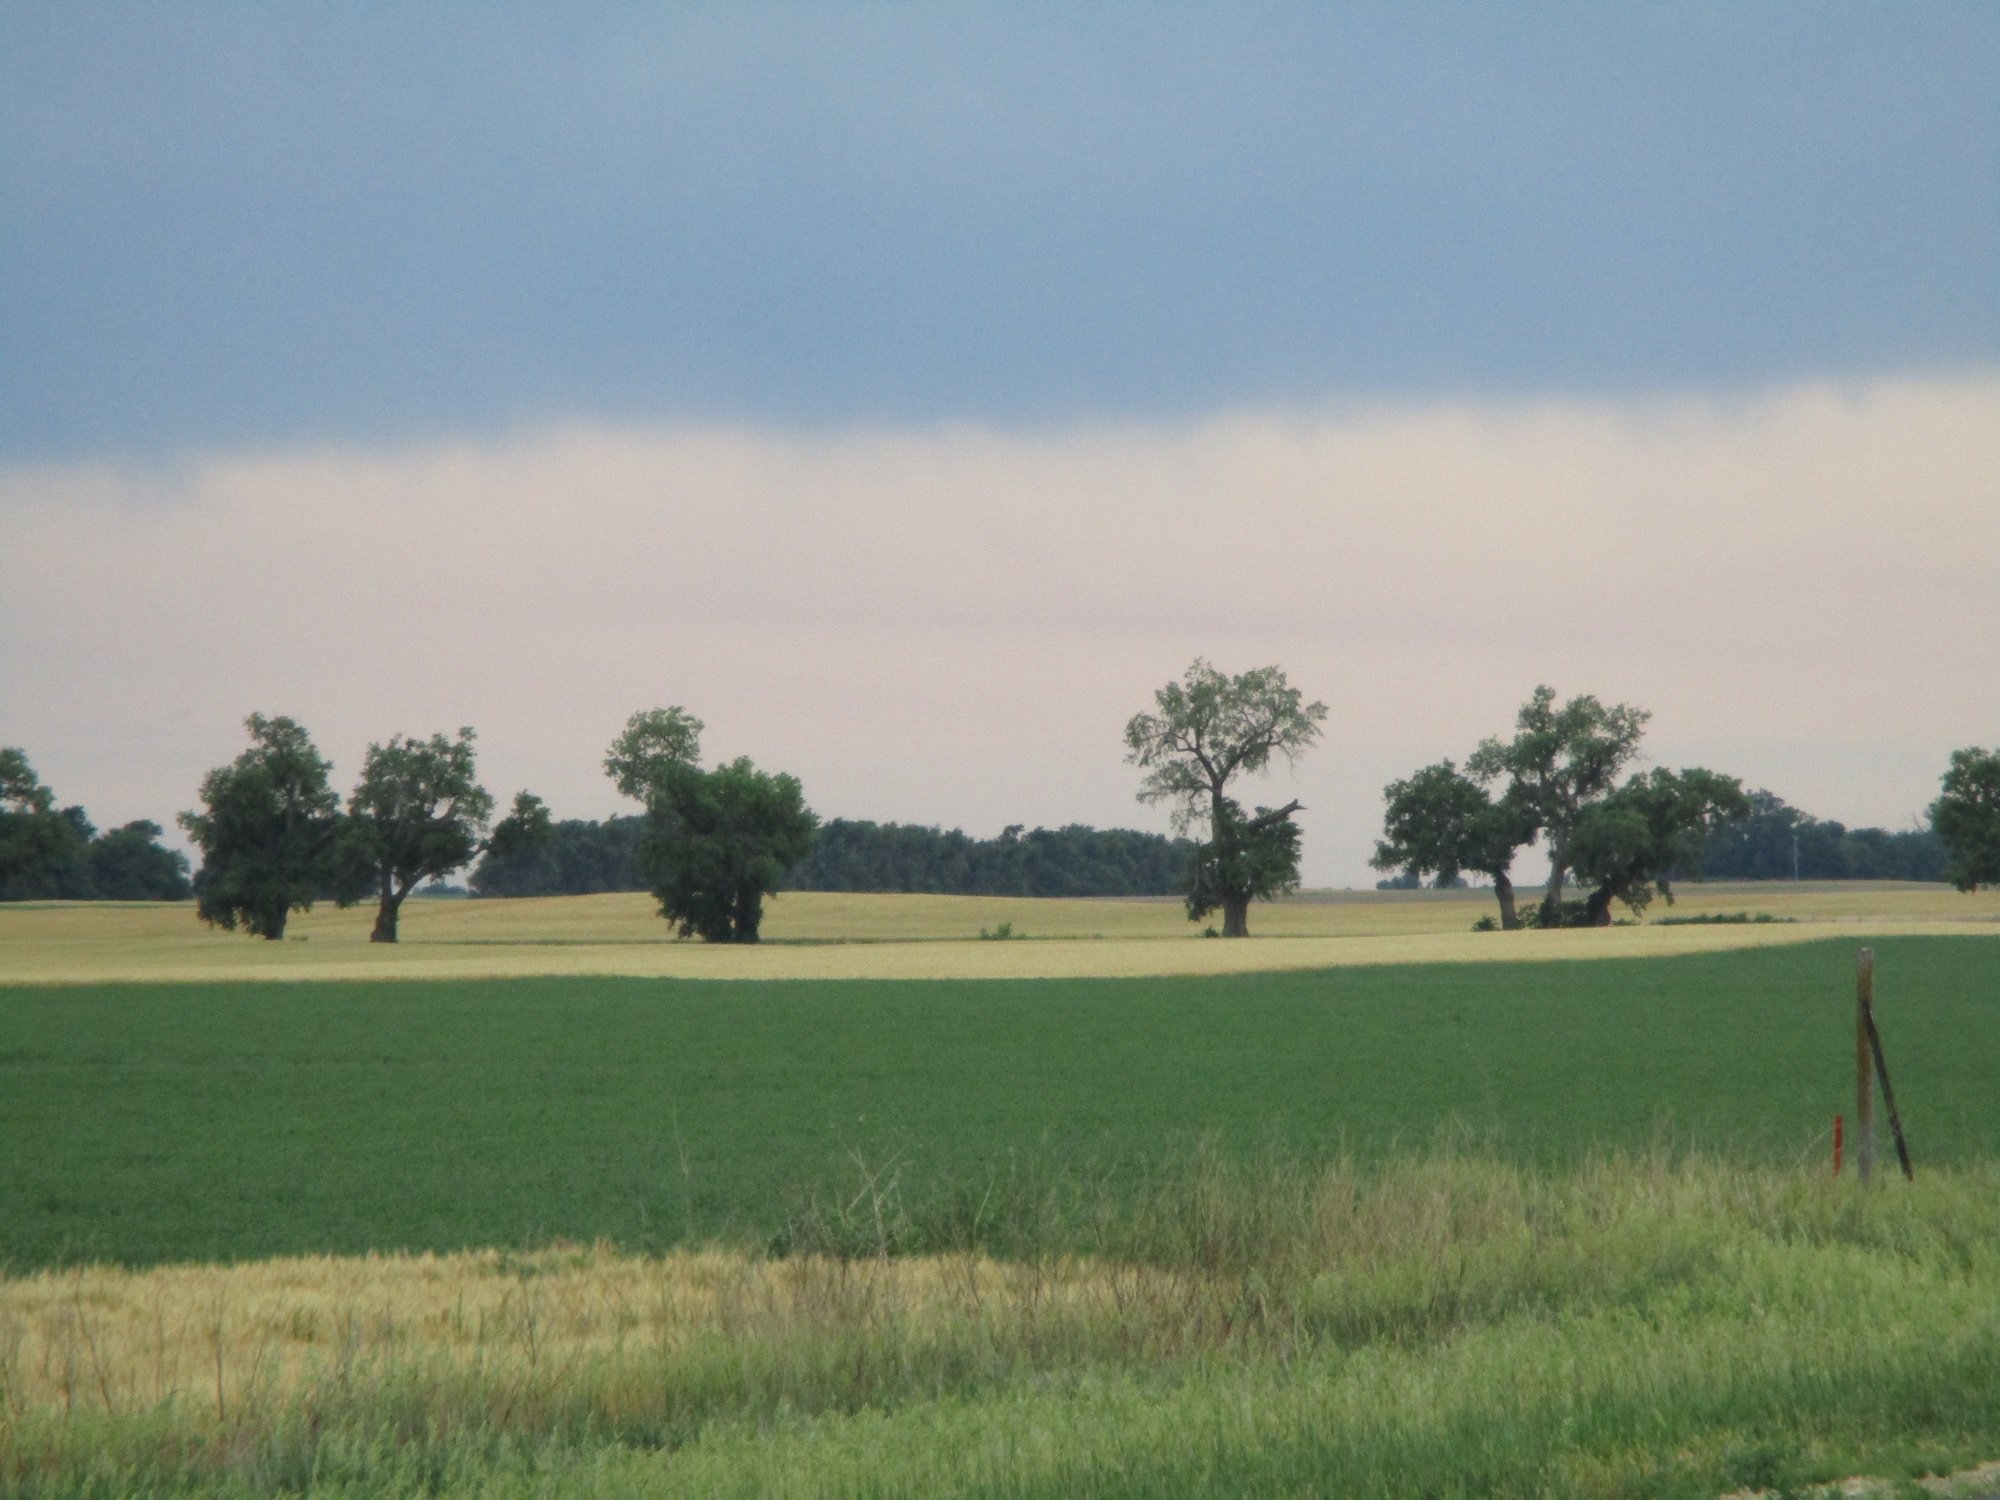 A farm field in Kansas. The forground is deep green then there is a band of gold wheat with a line of trees. The sky is cloudy but clearing.